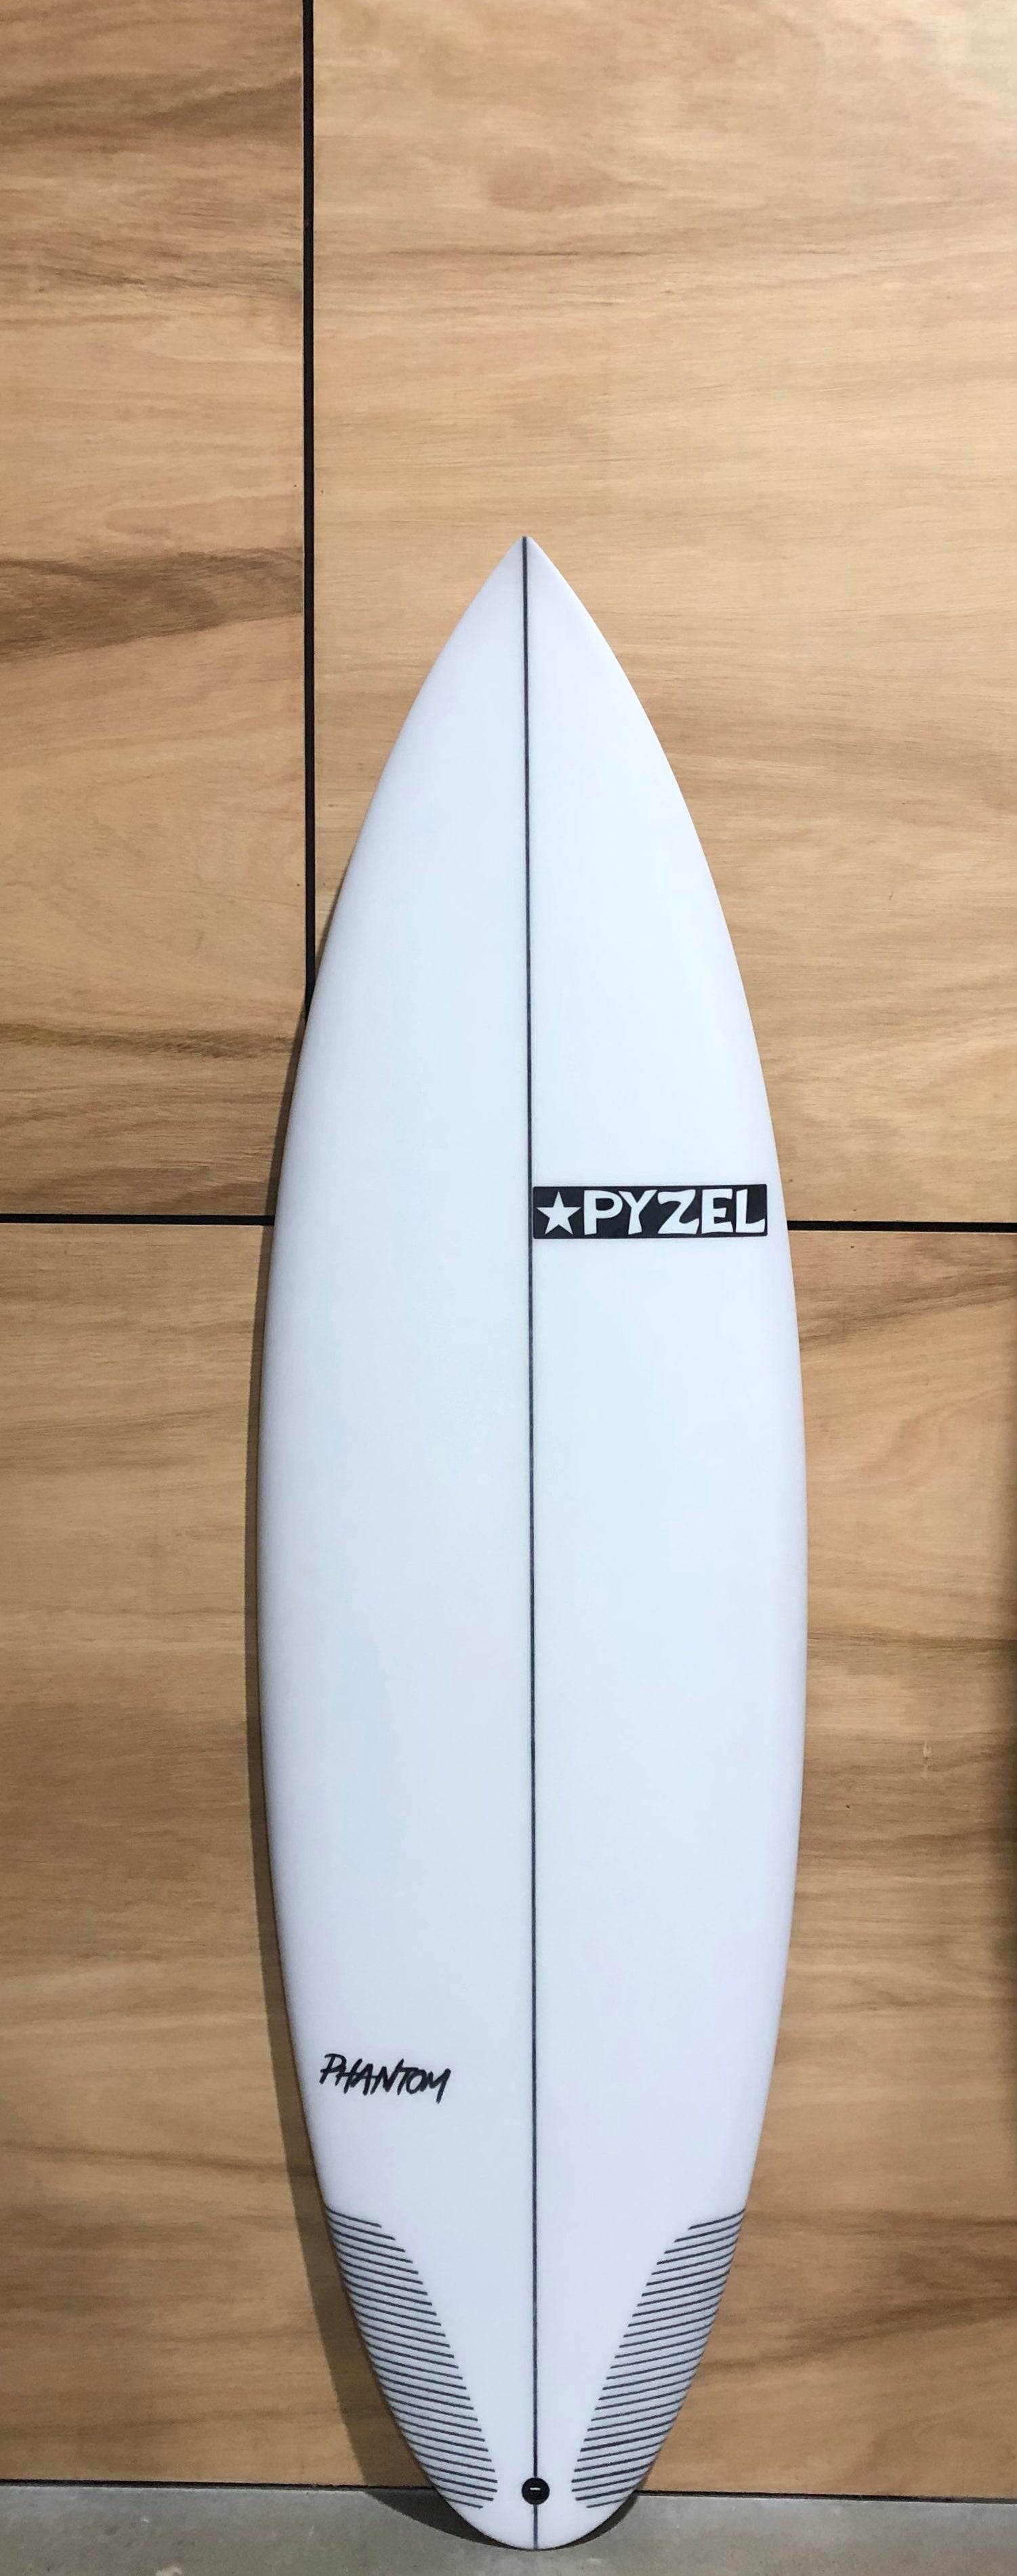 Pyzel Phantom Round Tail - Board Store PyzelSurfboard  